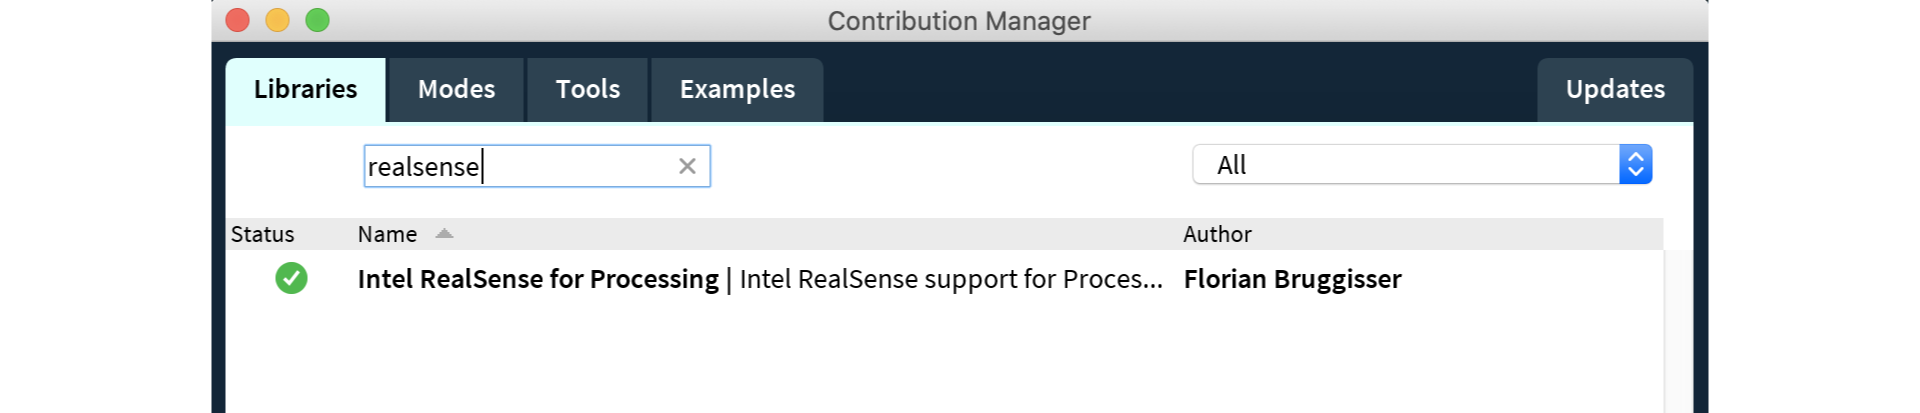 Contribution Manager